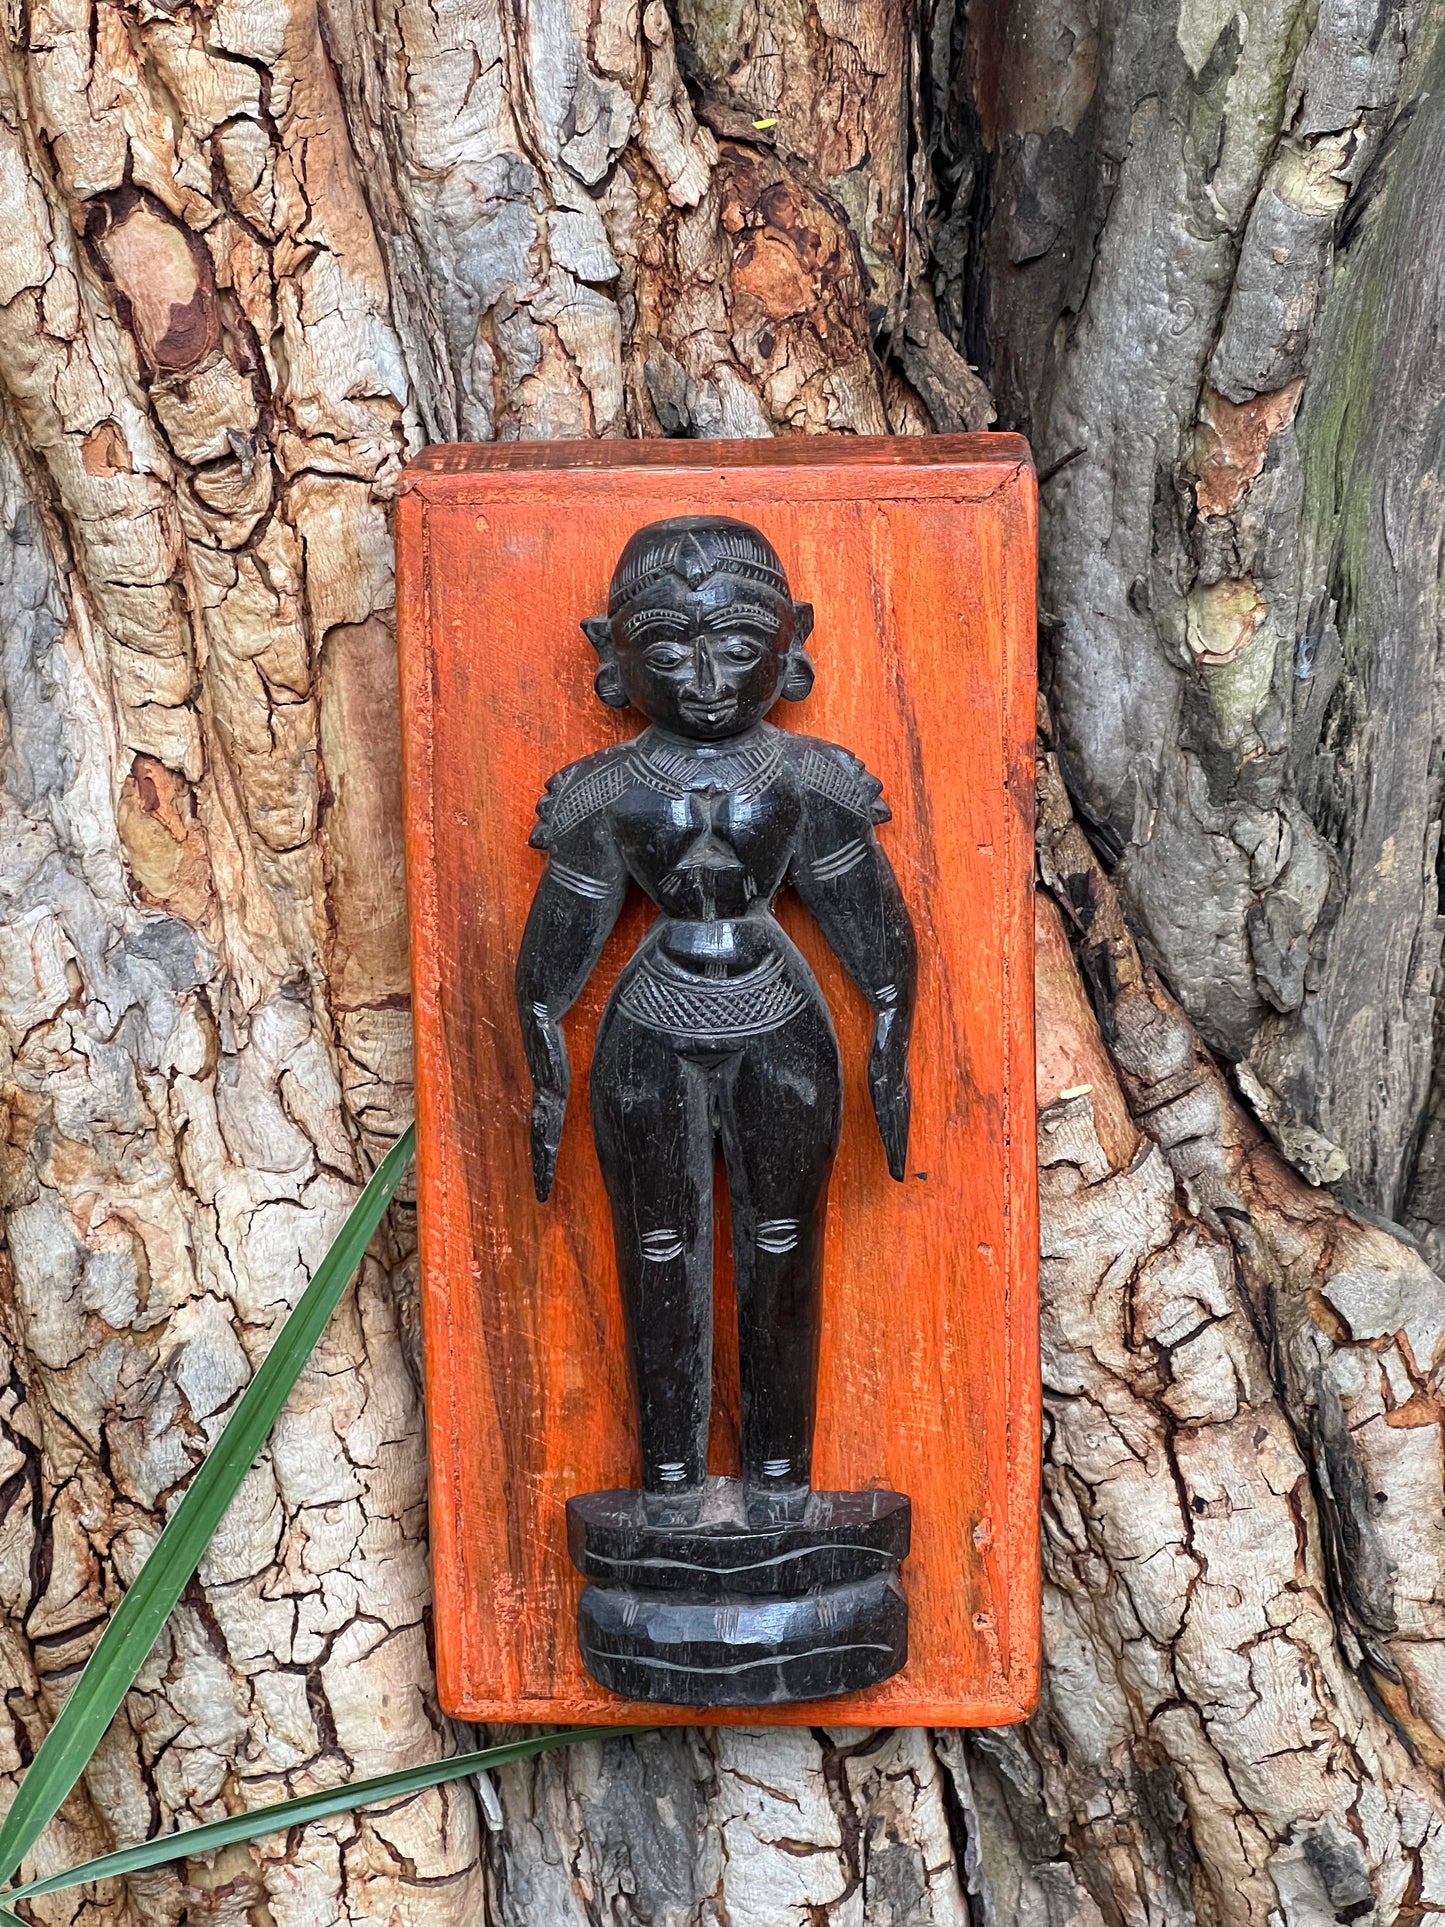 Image of Elegant and Traditional Marapachi Woman Doll.  The Source India is an Indian Handicraft, Home Decor, Furnishing and Textiles Store. Based out of Hauz Khas Village New Delhi, each piece is carefully procured to allow the enhancement of India's Culture.